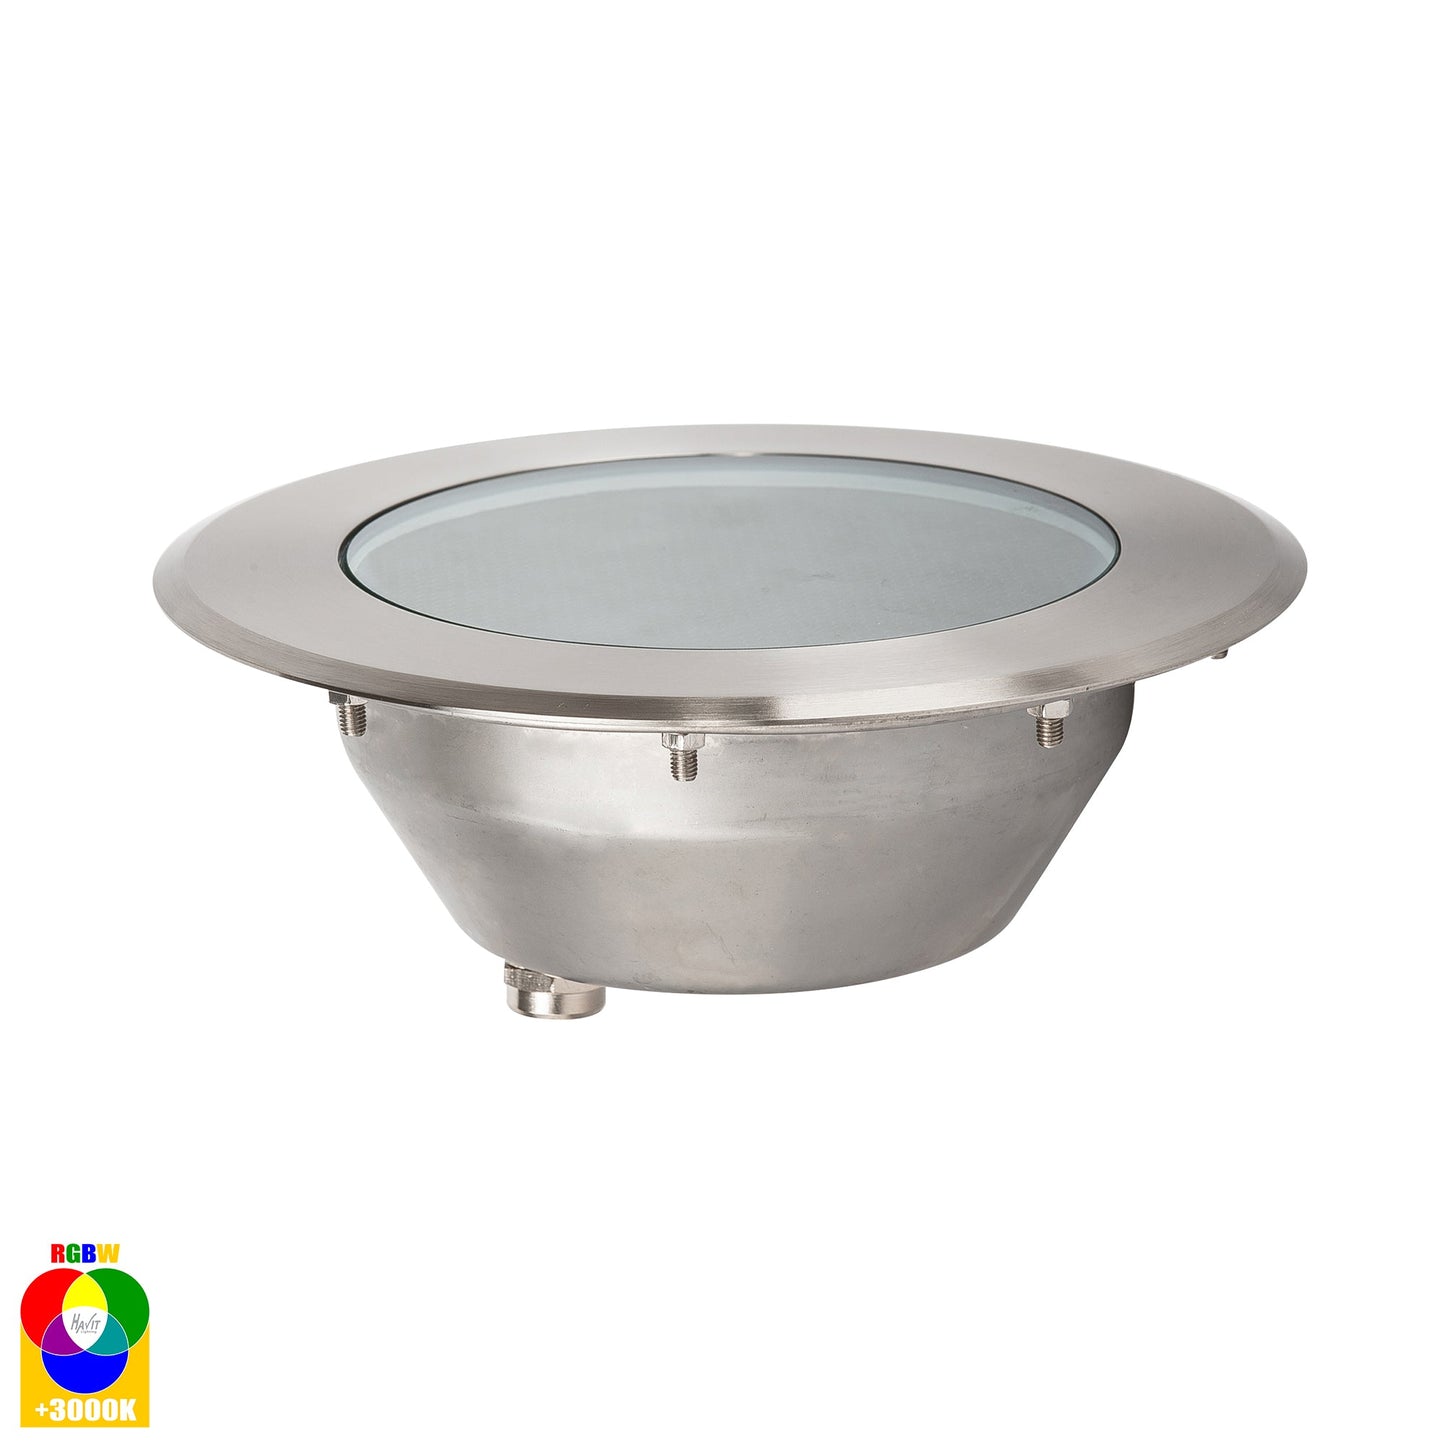 In-Ground Uplighter Round, 210mm Face, 316 Stainless Steel  HV1843rgbw